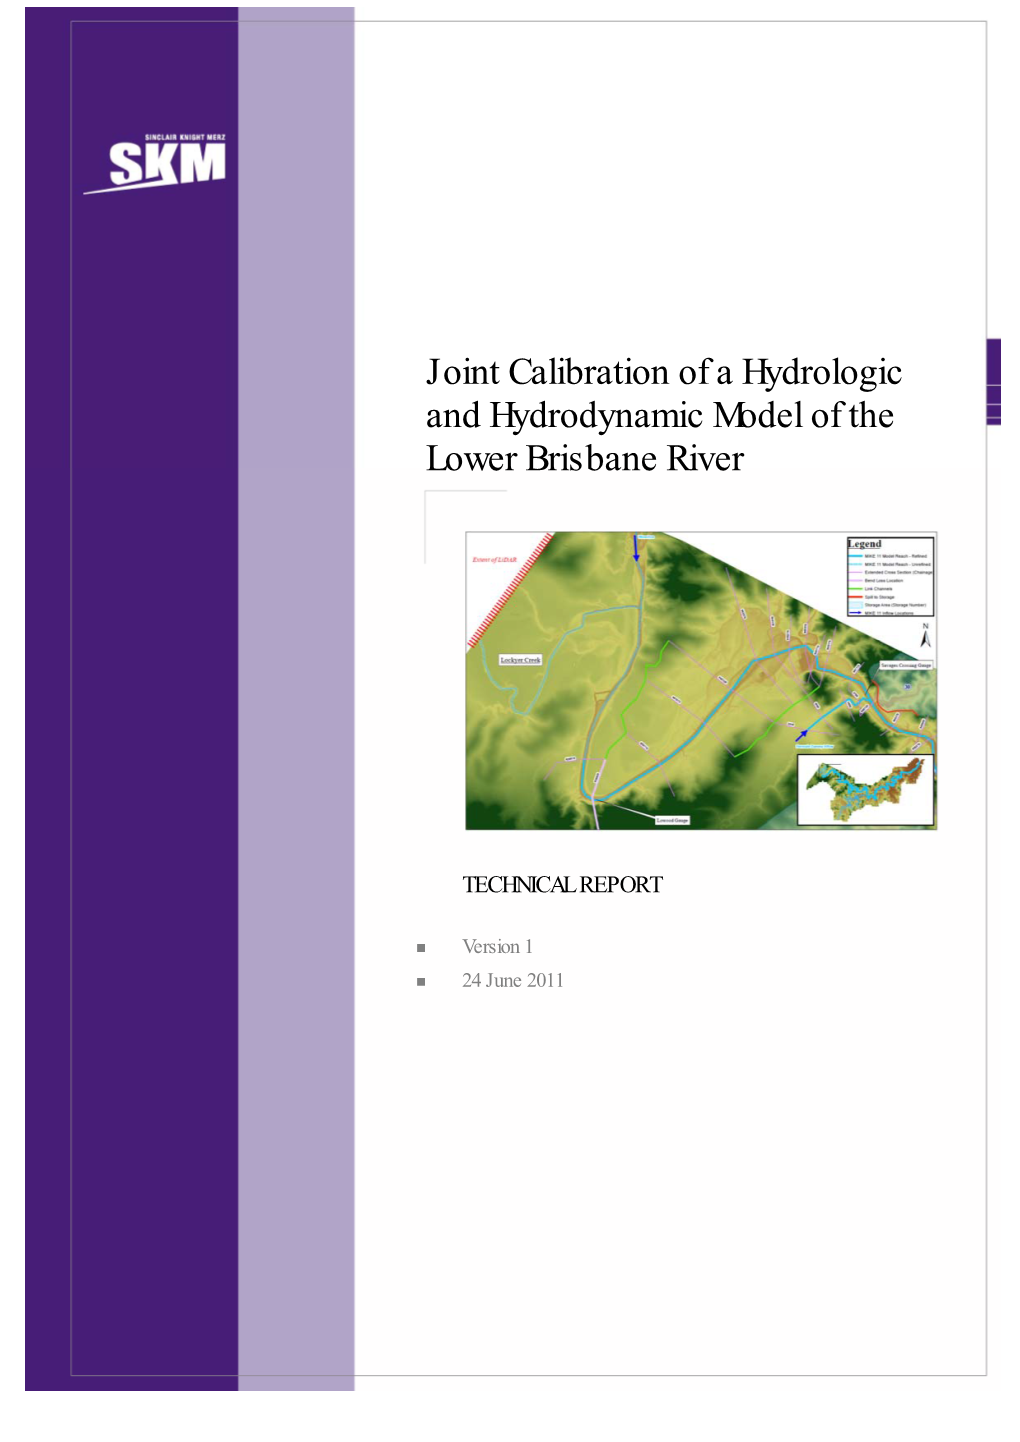 Joint Calibration of a Hydrologic and Hydrodynamic Model of the Lower Brisbane River